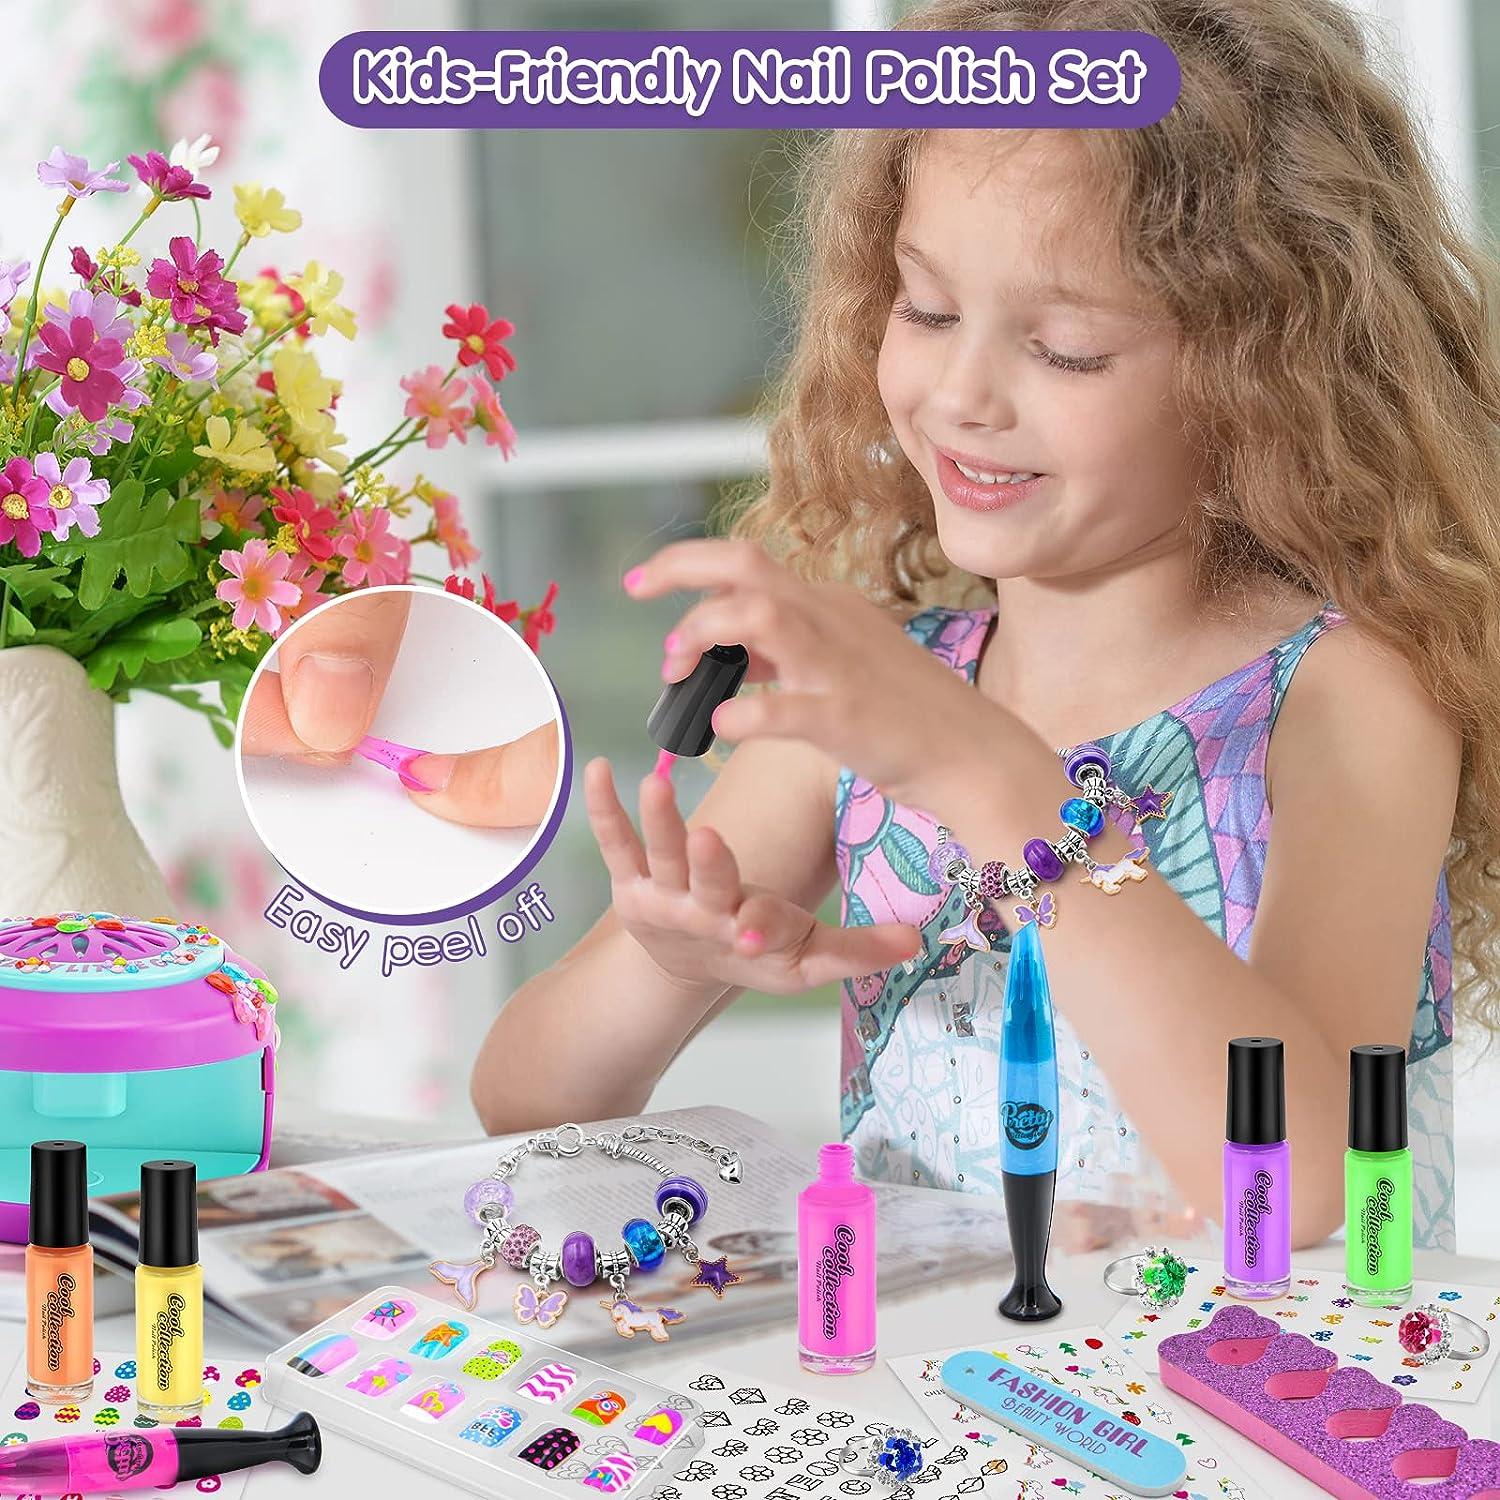 BATTOP Kids Nail Polish Kit for Girls Ages 7-12 Years Old - Nail Art Studio  Set - Cool Girly Gifts with Nail Polish Pen Dryer Sticker Charm Bracelet  Making Kit & Ring